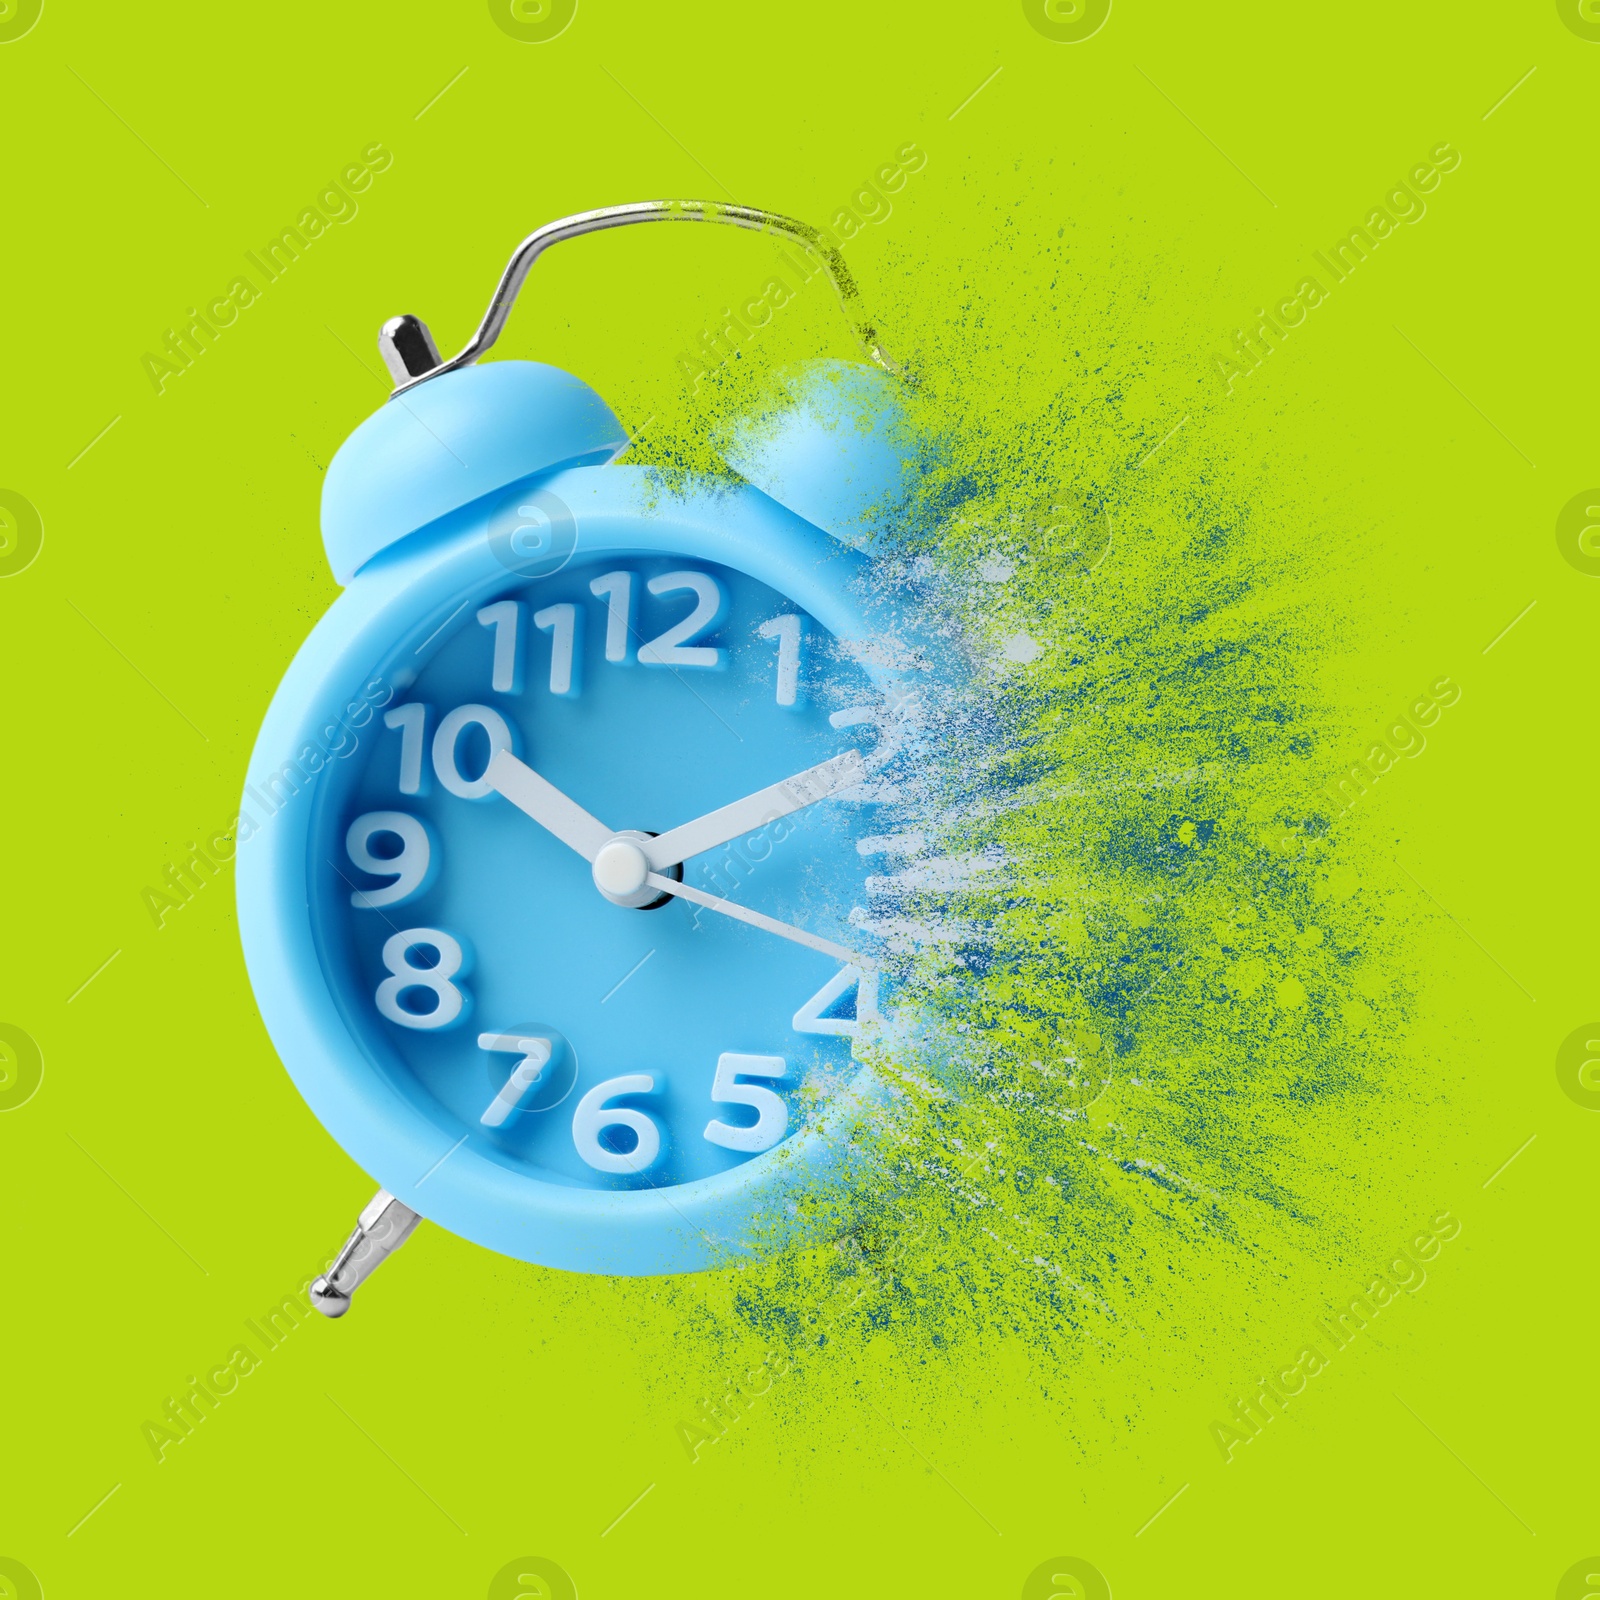 Image of Light blue alarm clock dissolving on green background. Flow of time